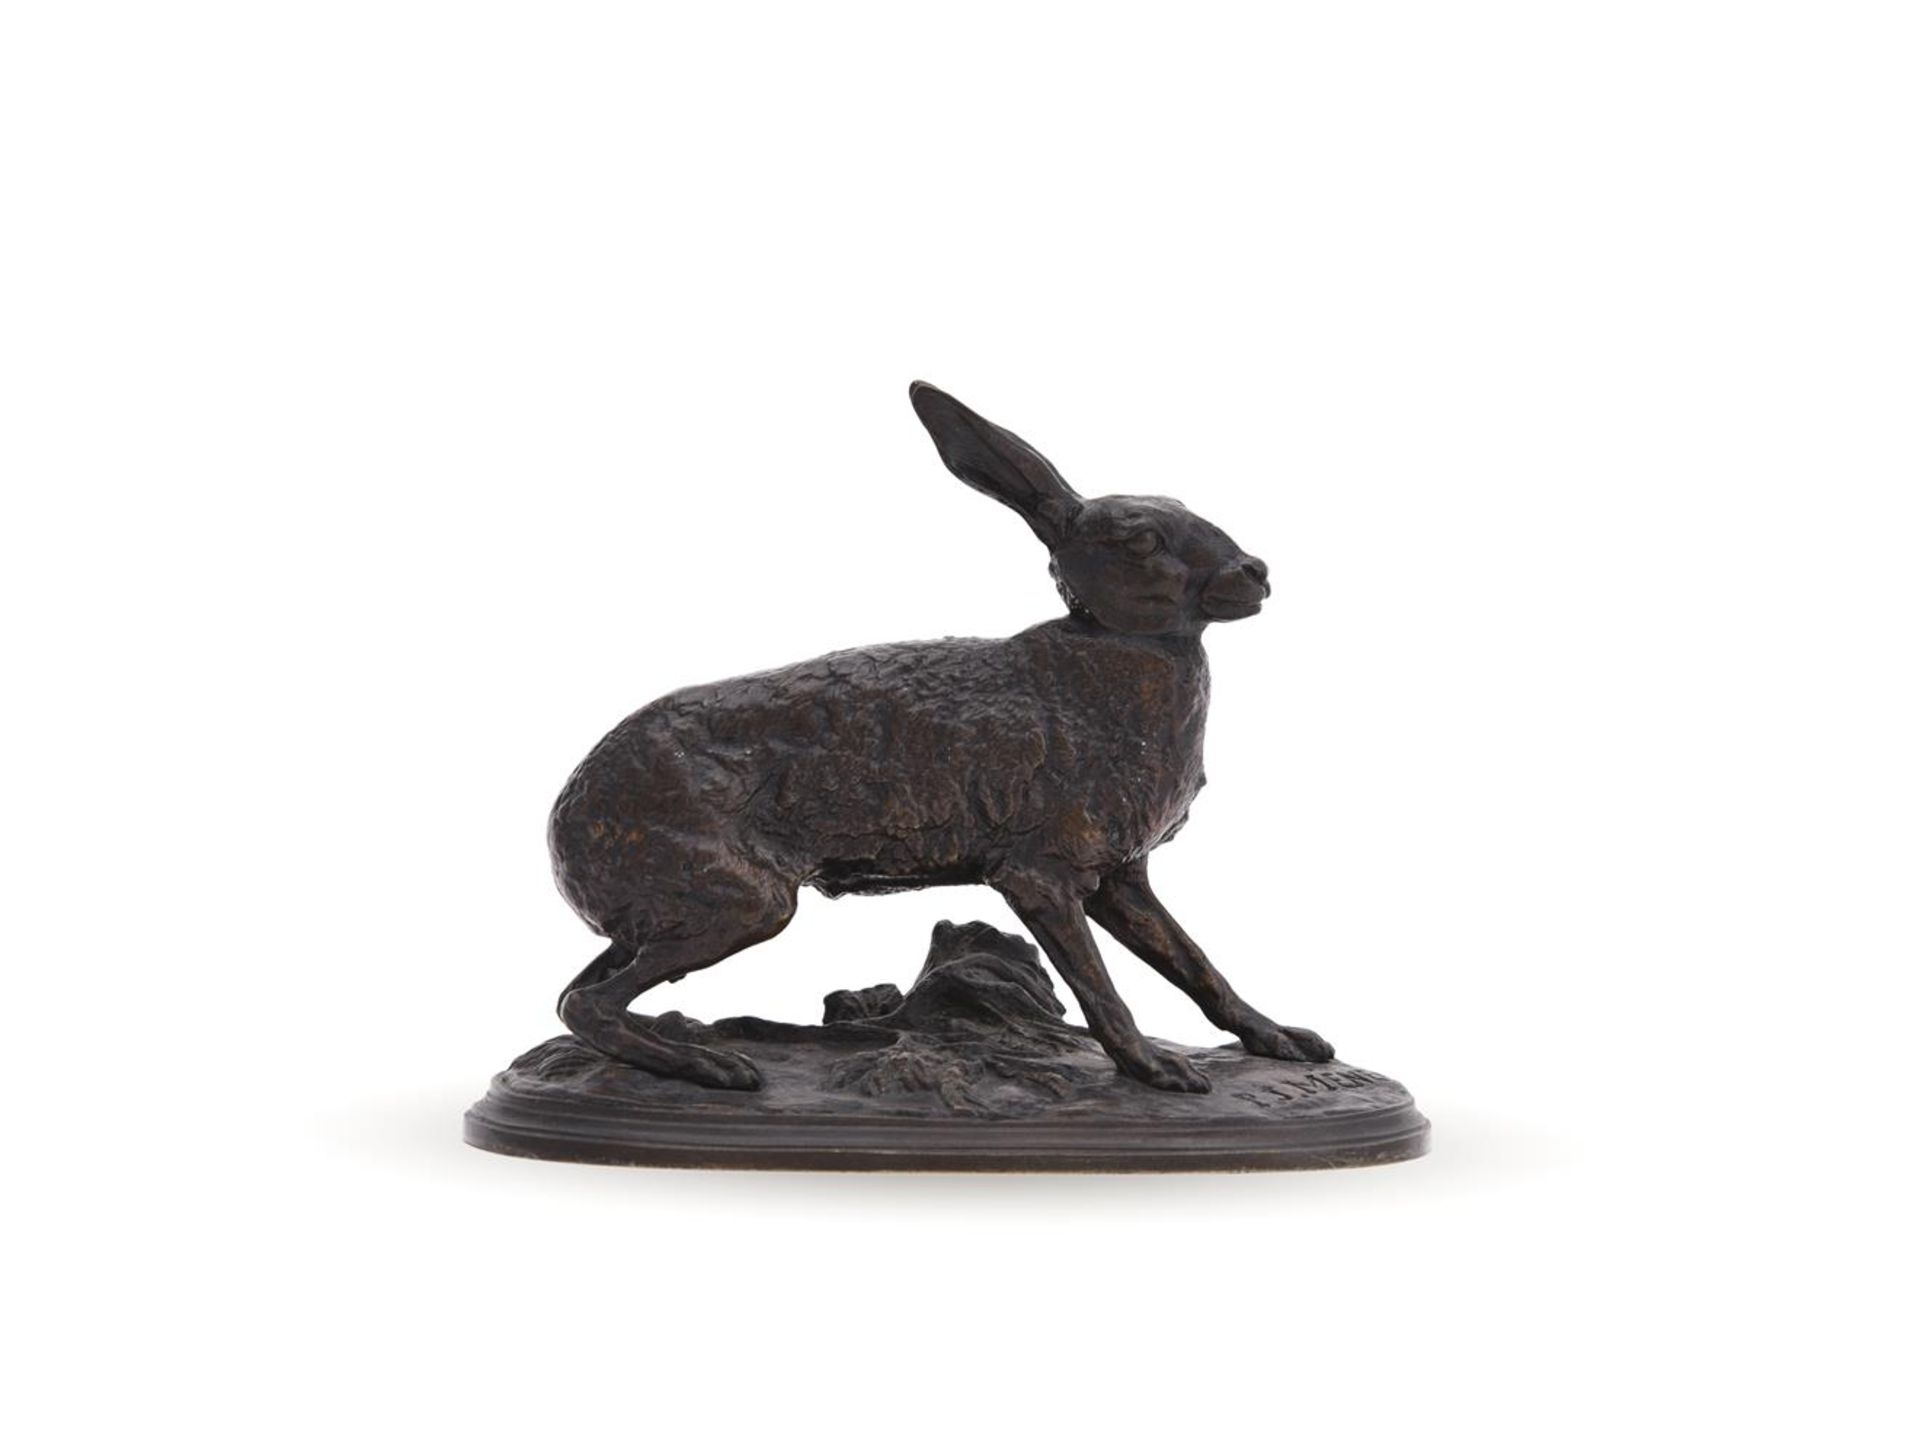 PIERRE-JULES MÊNE (FRENCH, 1810-1879), A BRONZE MODEL OF AN ALERT HARE - Image 2 of 5